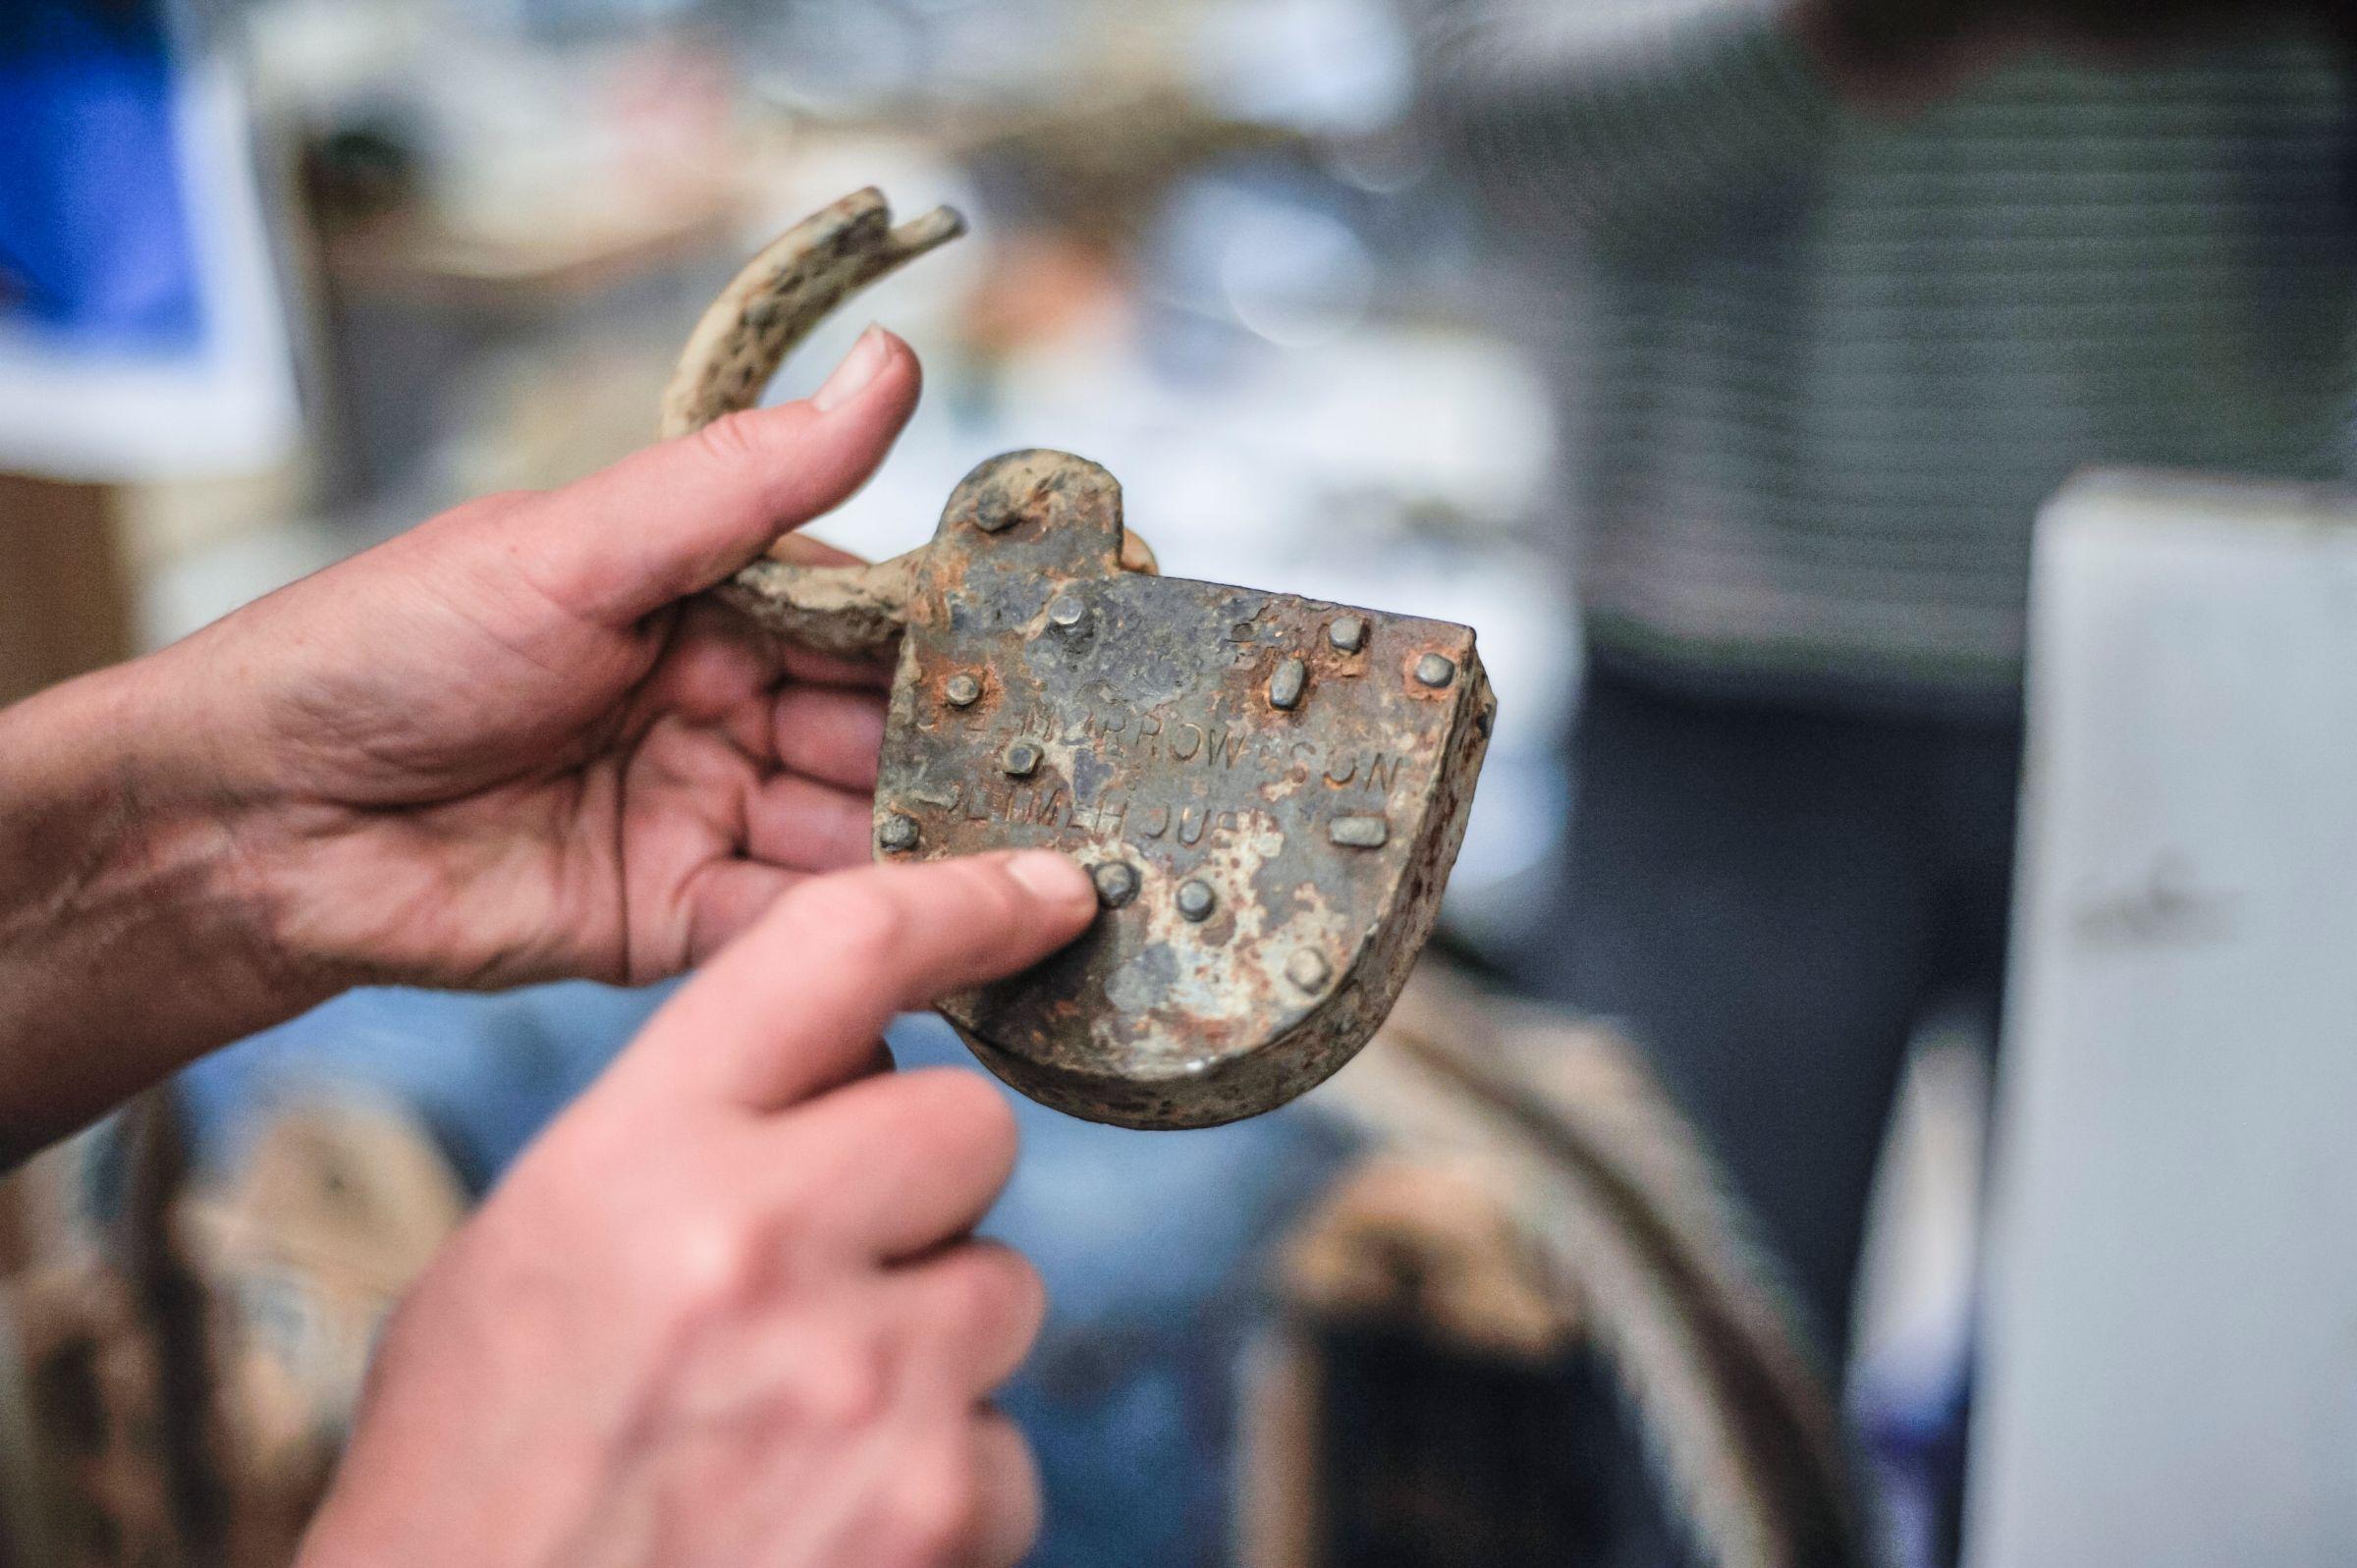 A man holding a rusted padlock